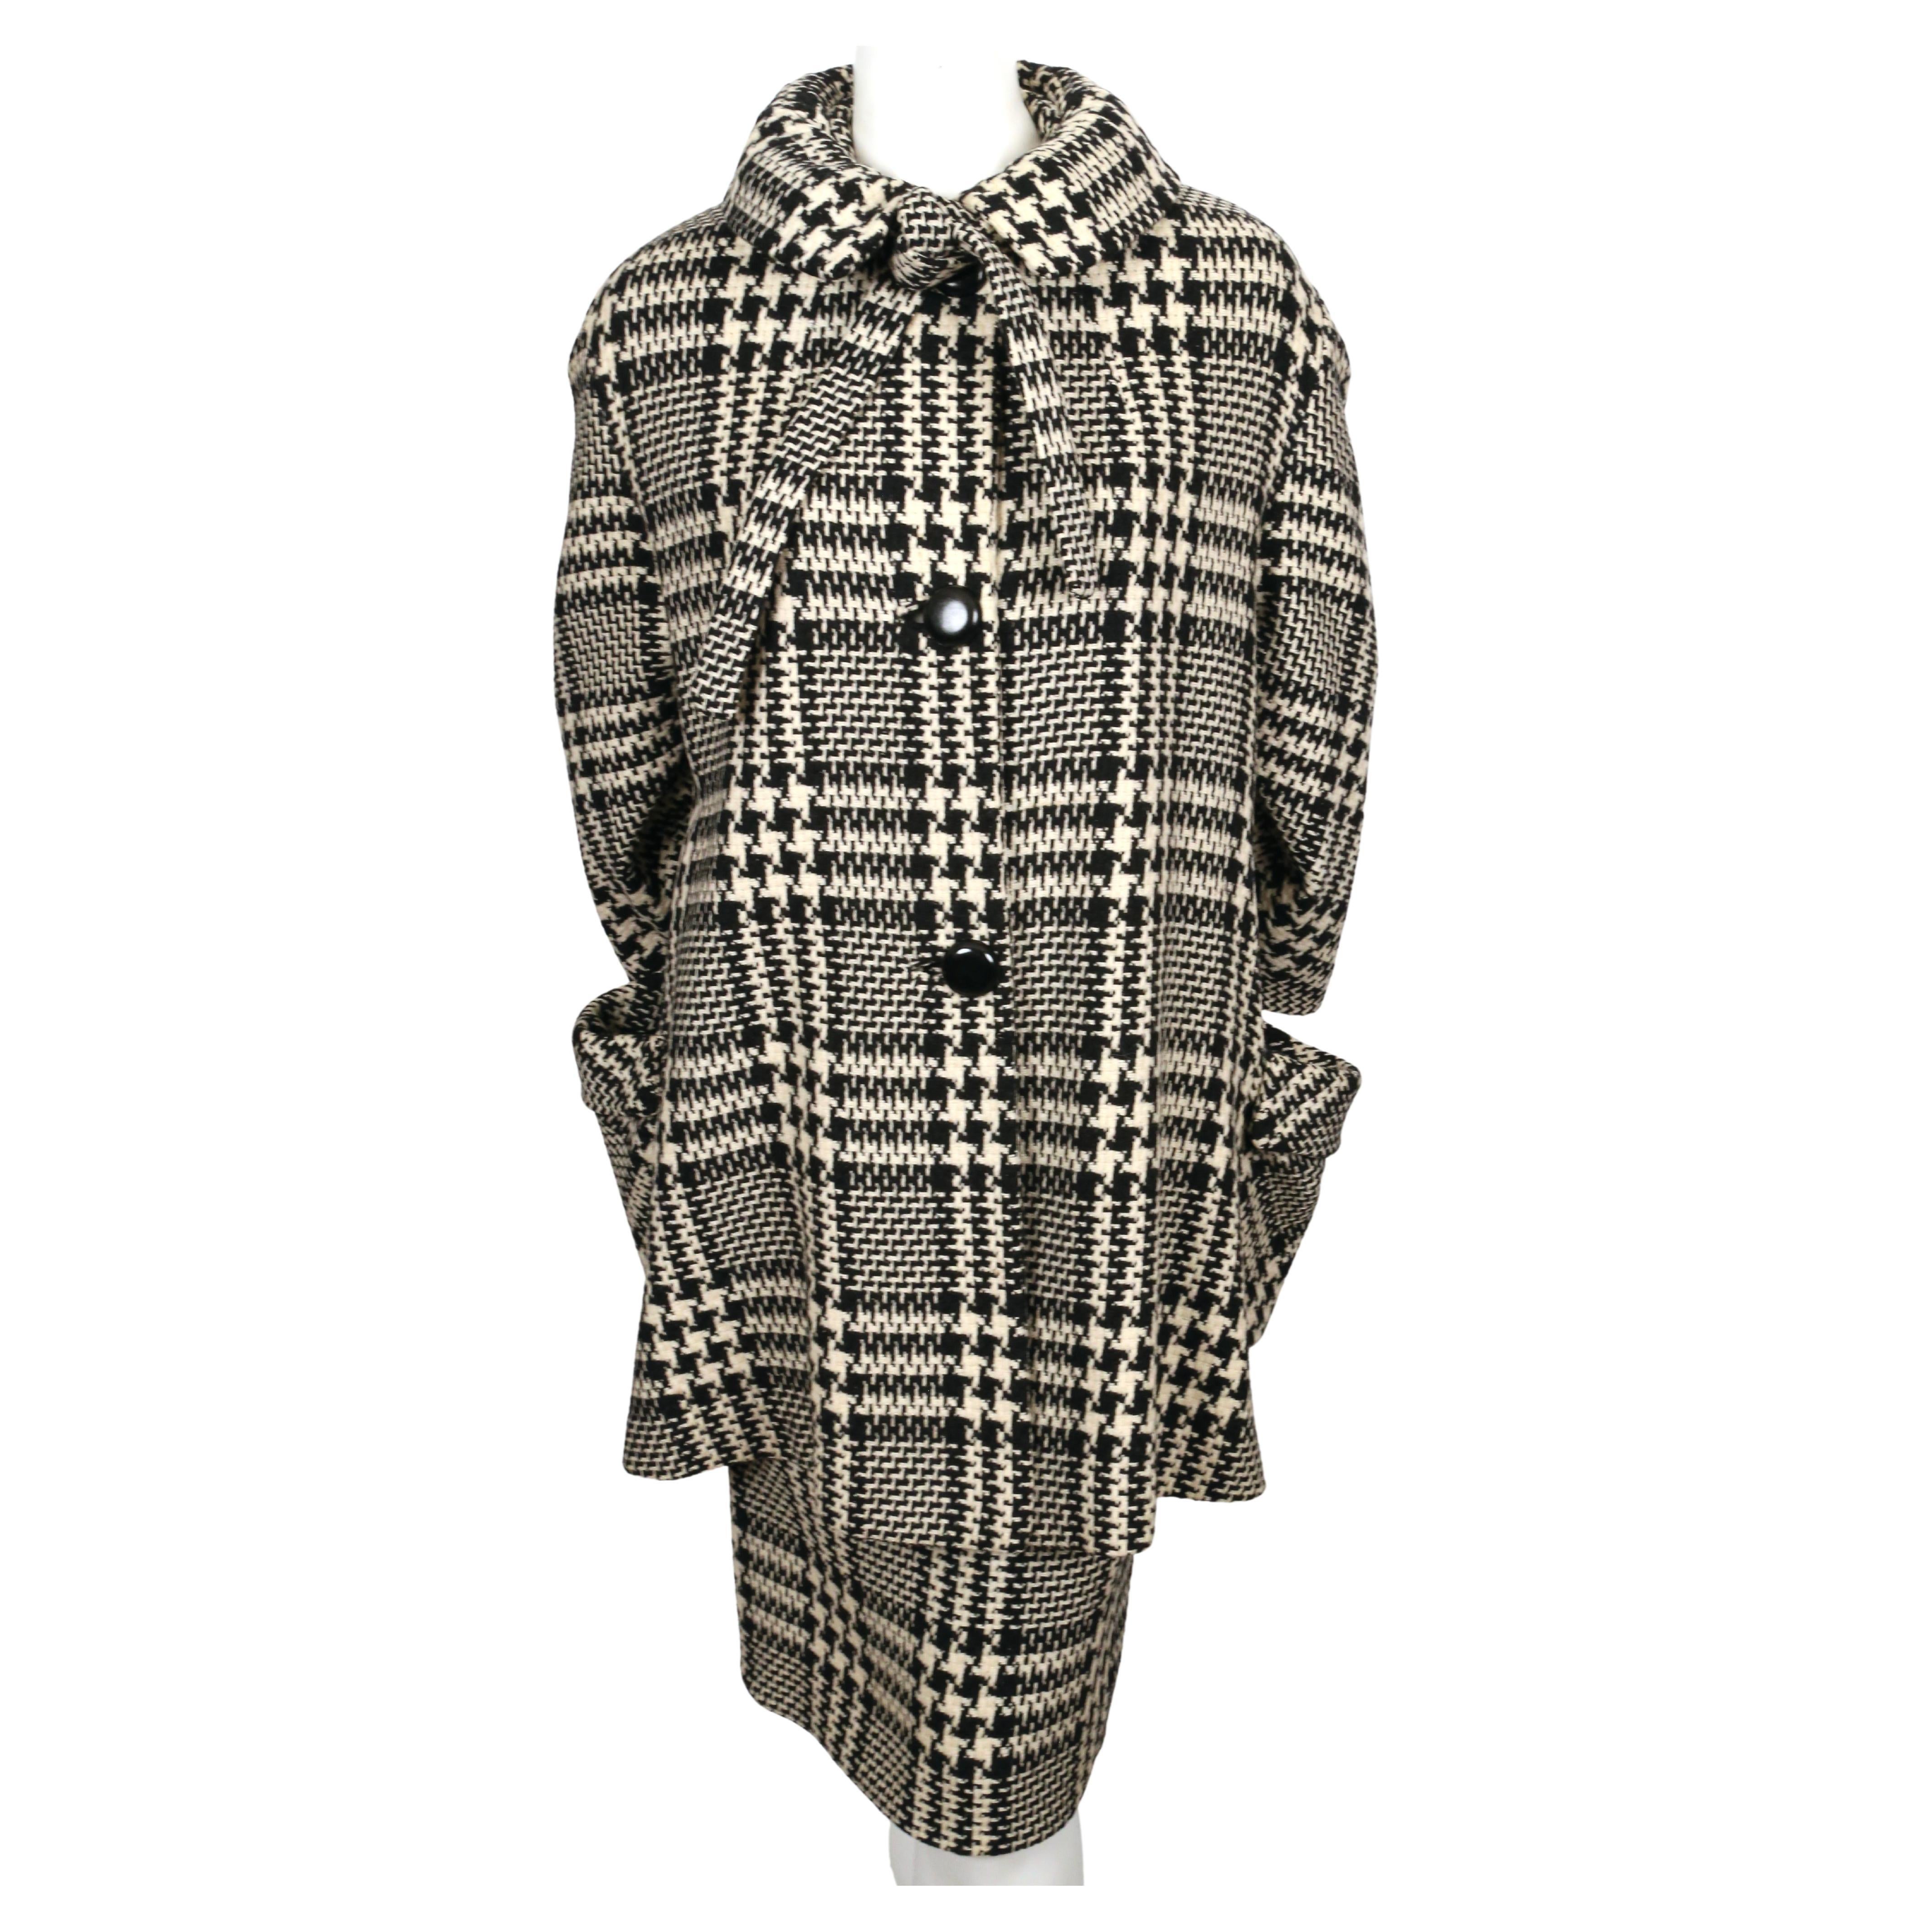 Cream and black houndstooth woven wool swing coat with necktie and matching skirt made for Joseph Magnin dating to the 1960's. Coat fits many sizes due to loose cute. Approximate measurements of coat: drop shoulder 20